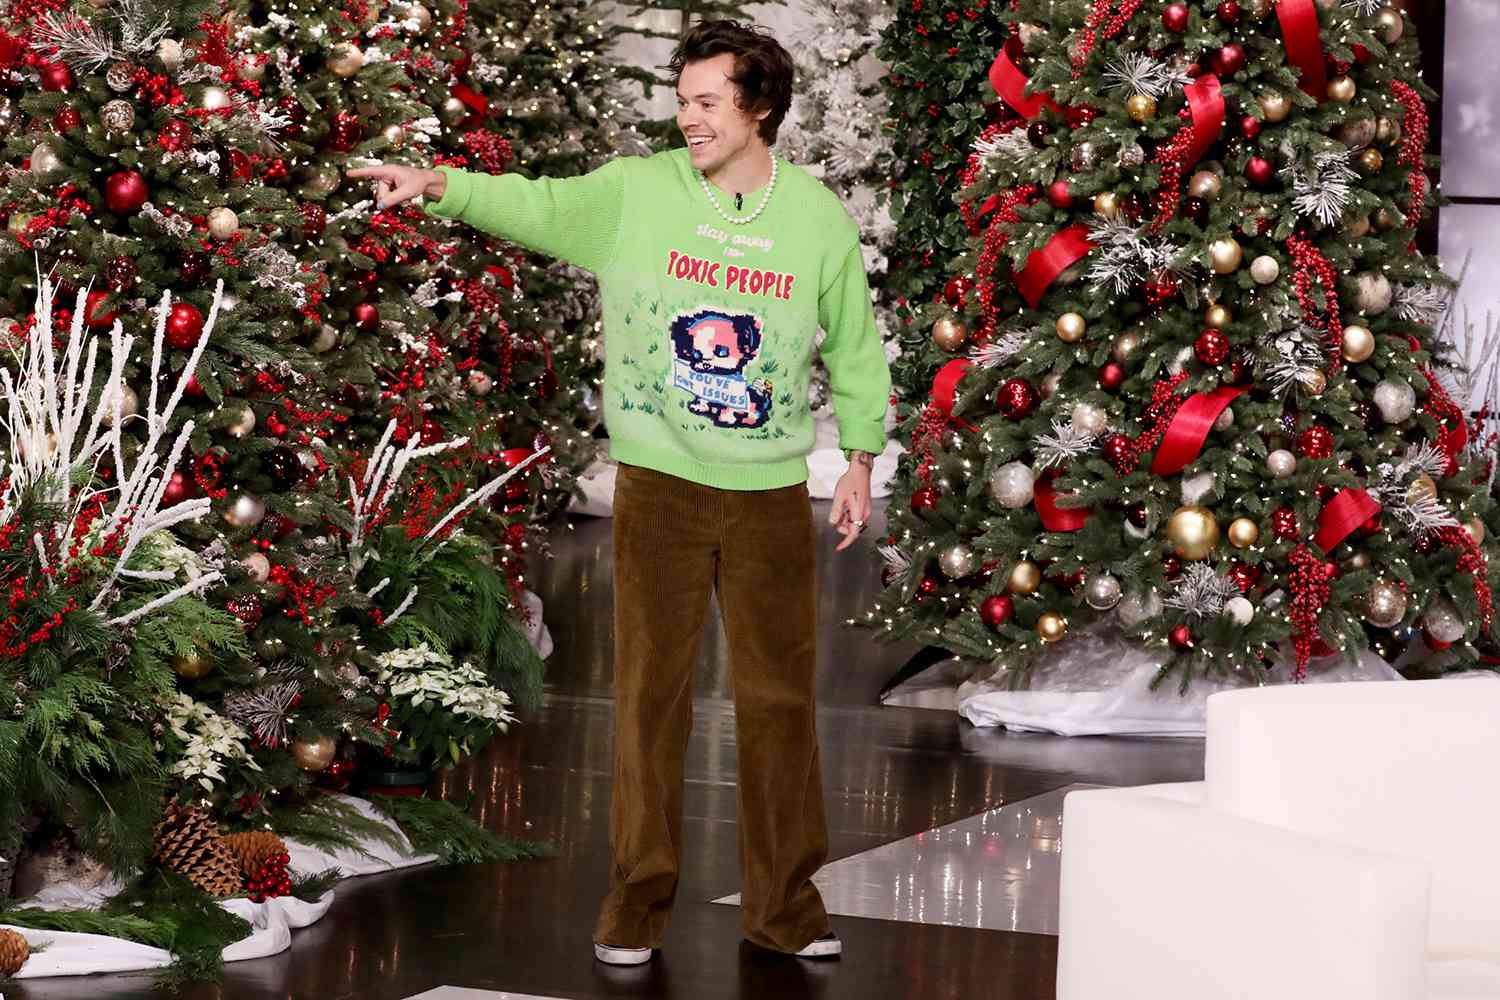 Harry Styles sits down for an exclusive interview on &ldquo;The Ellen DeGeneres Show&rdquo; airing Wednesday, December 18th to discuss his hit sophomore solo album, &ldquo;Fine Line.&rdquo; Harry chats about his decision to travel alone to Japan for one month, and explains how he ended up posing nude for the artwork inside the vinyl edition of &ldquo;Fine Line.&rdquo;